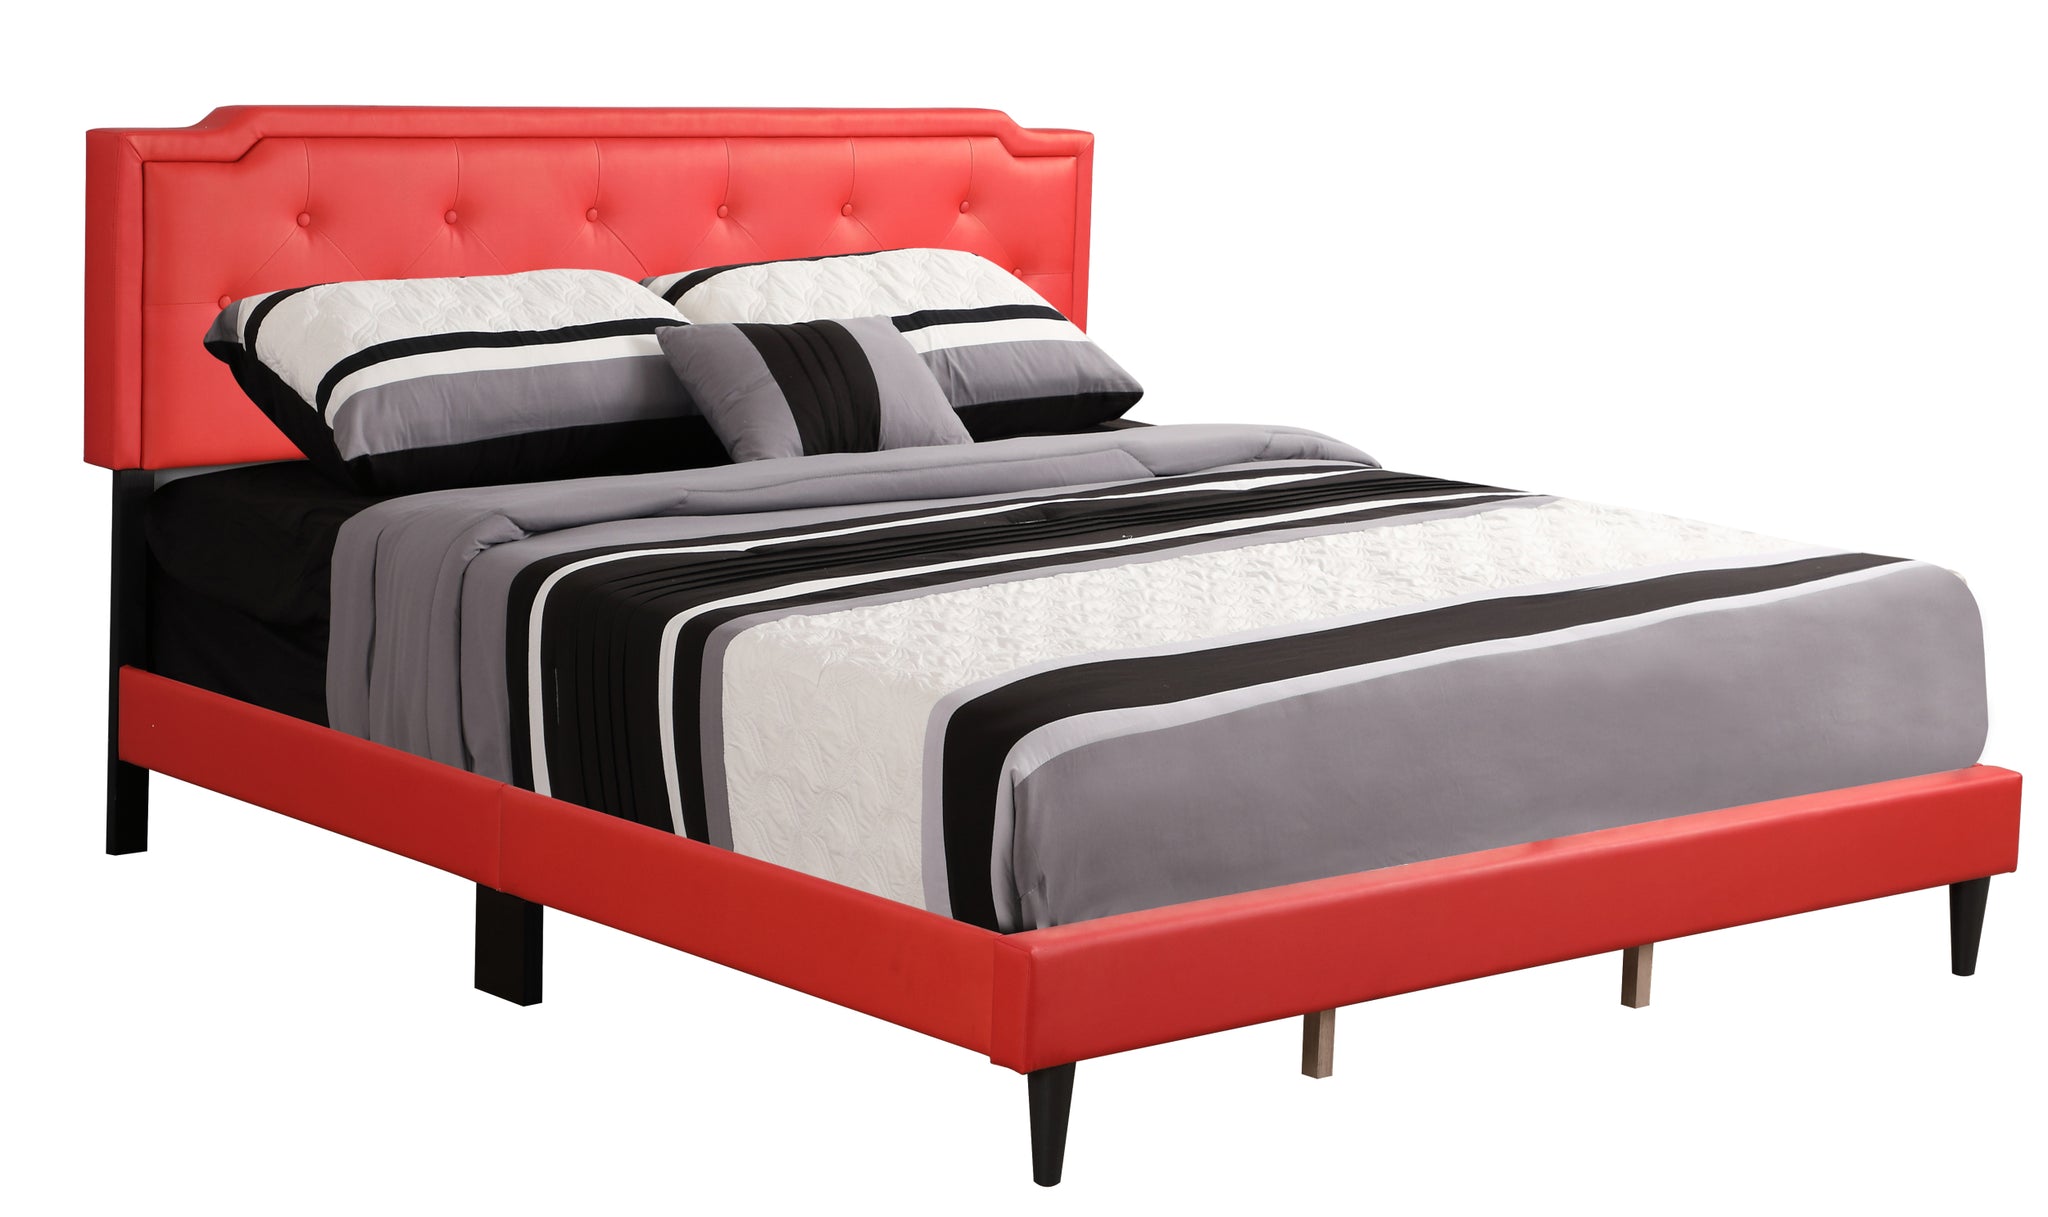 Deb G1117 KB UP King Bed All in One red-foam-pu